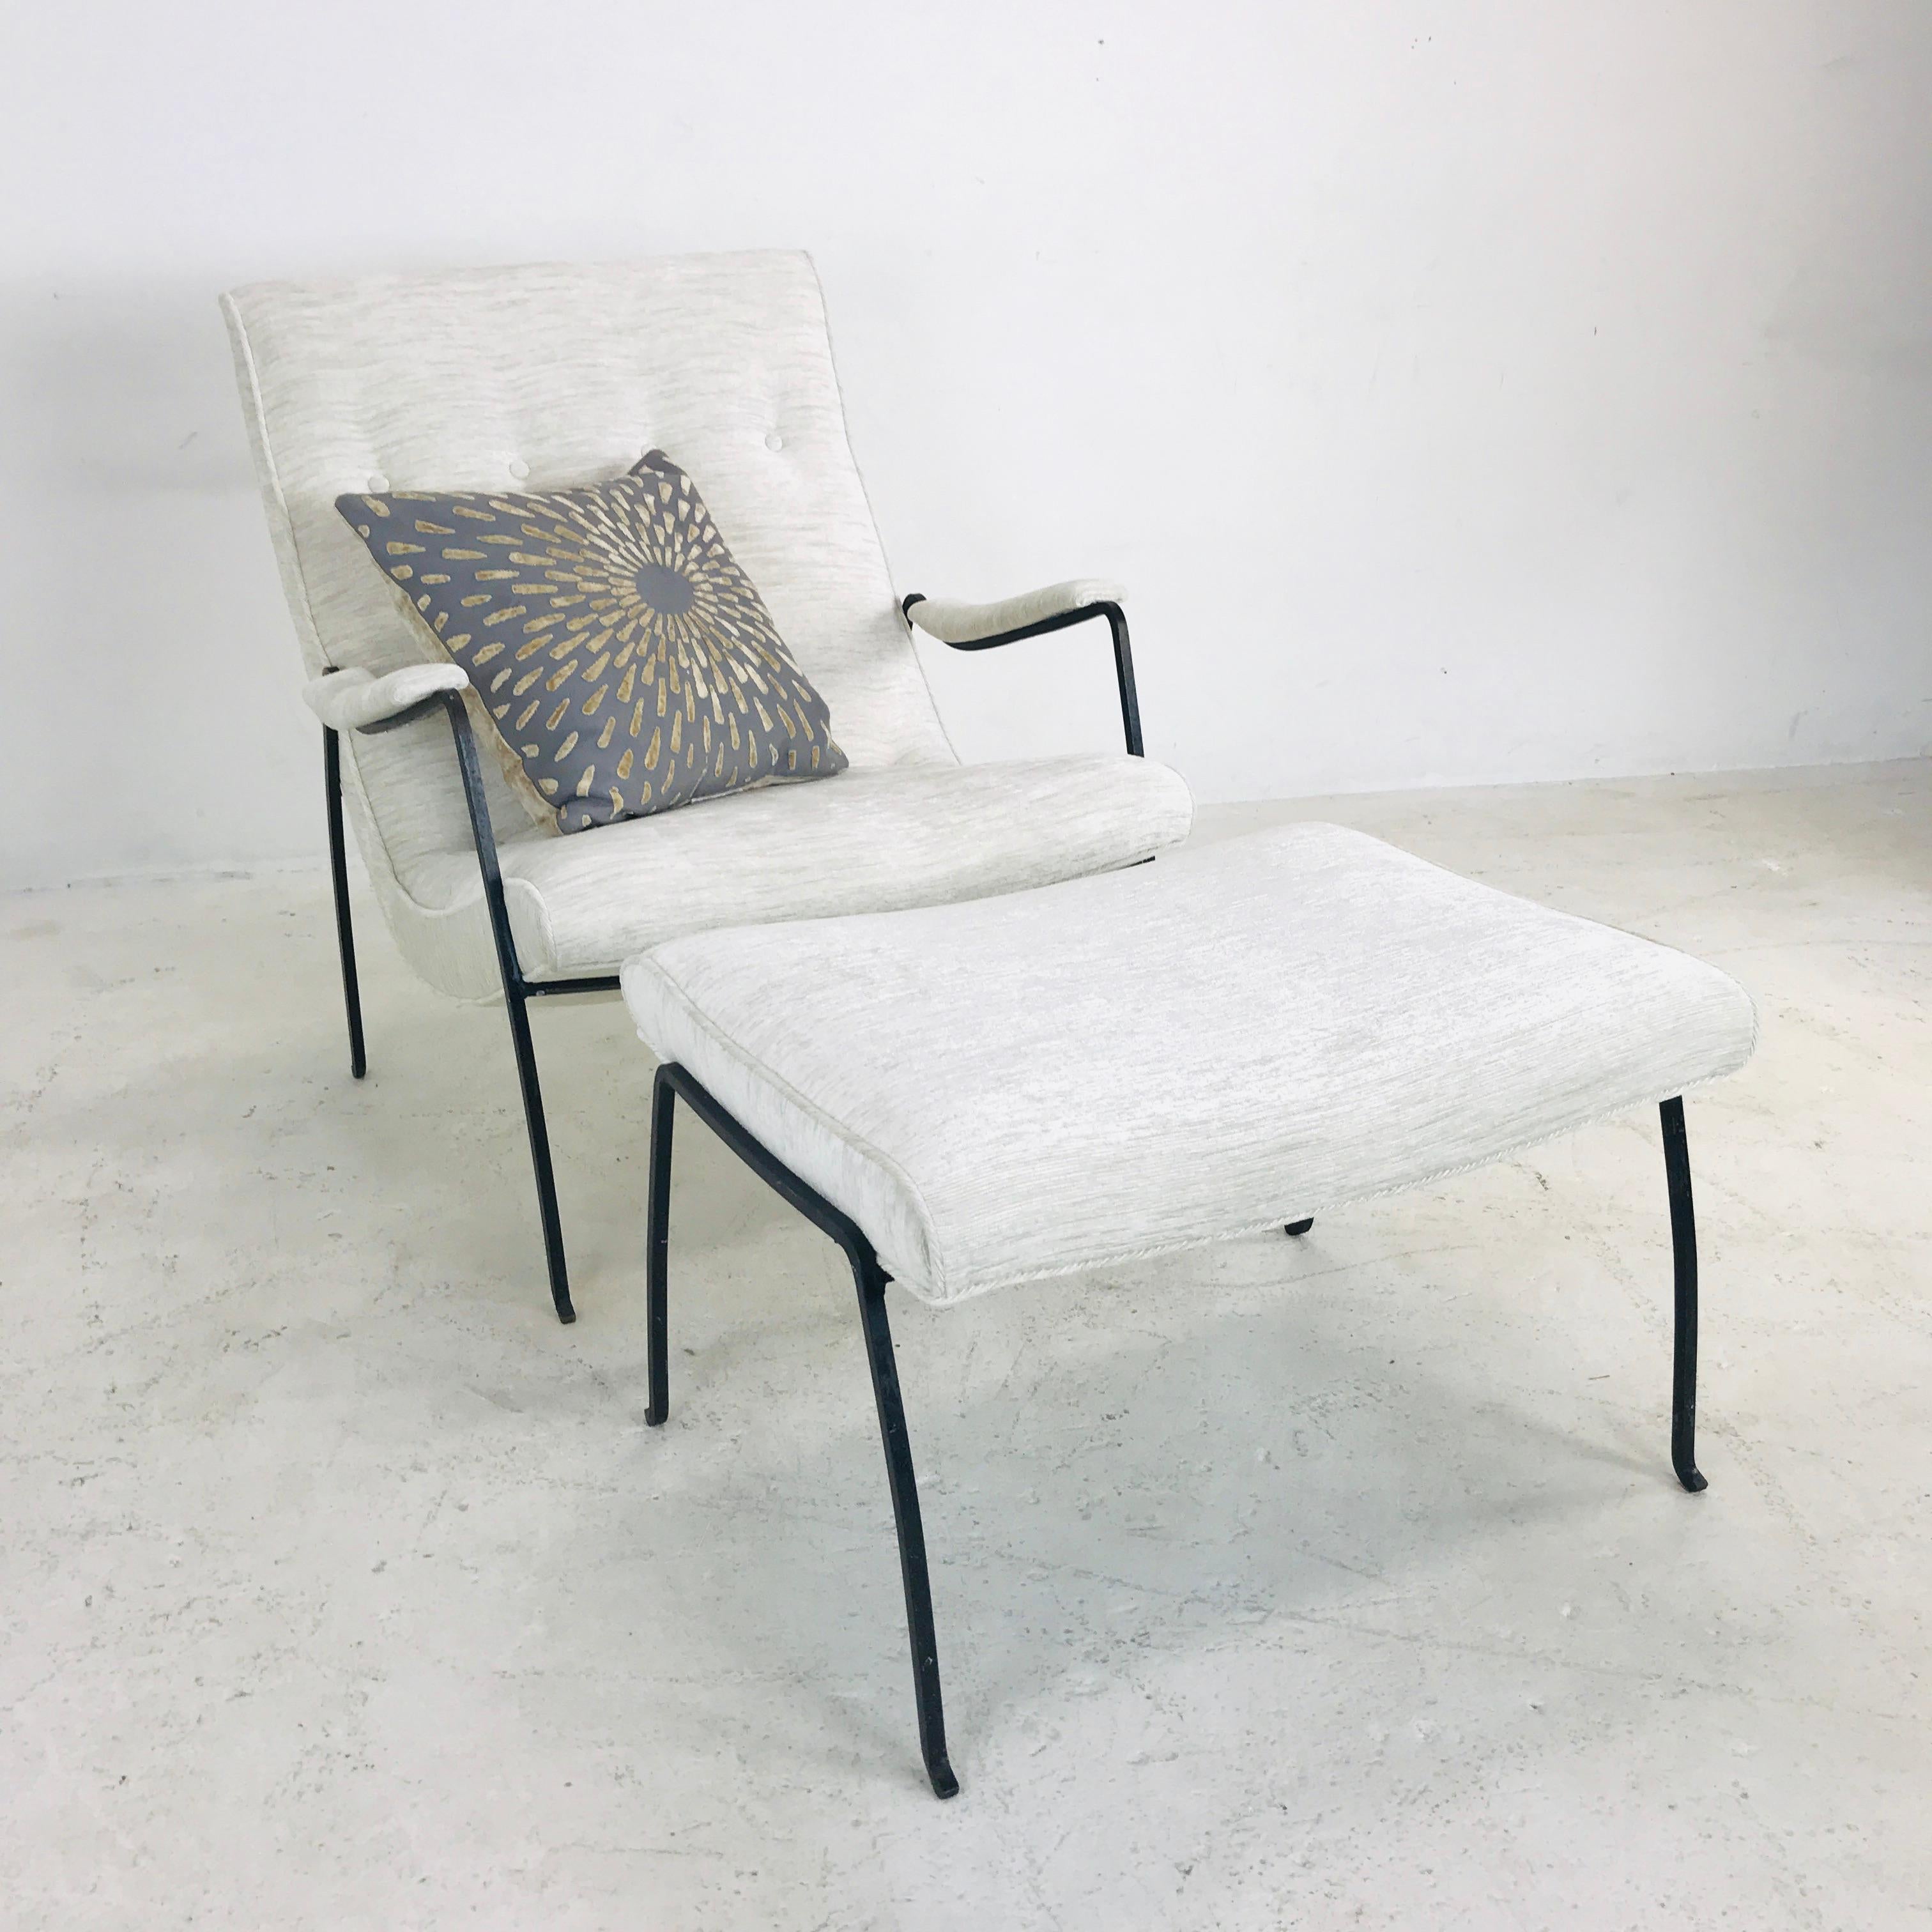 American Iron Framed Lounge Chair and Ottoman by Milo Baughman for Pacifica Iron Works